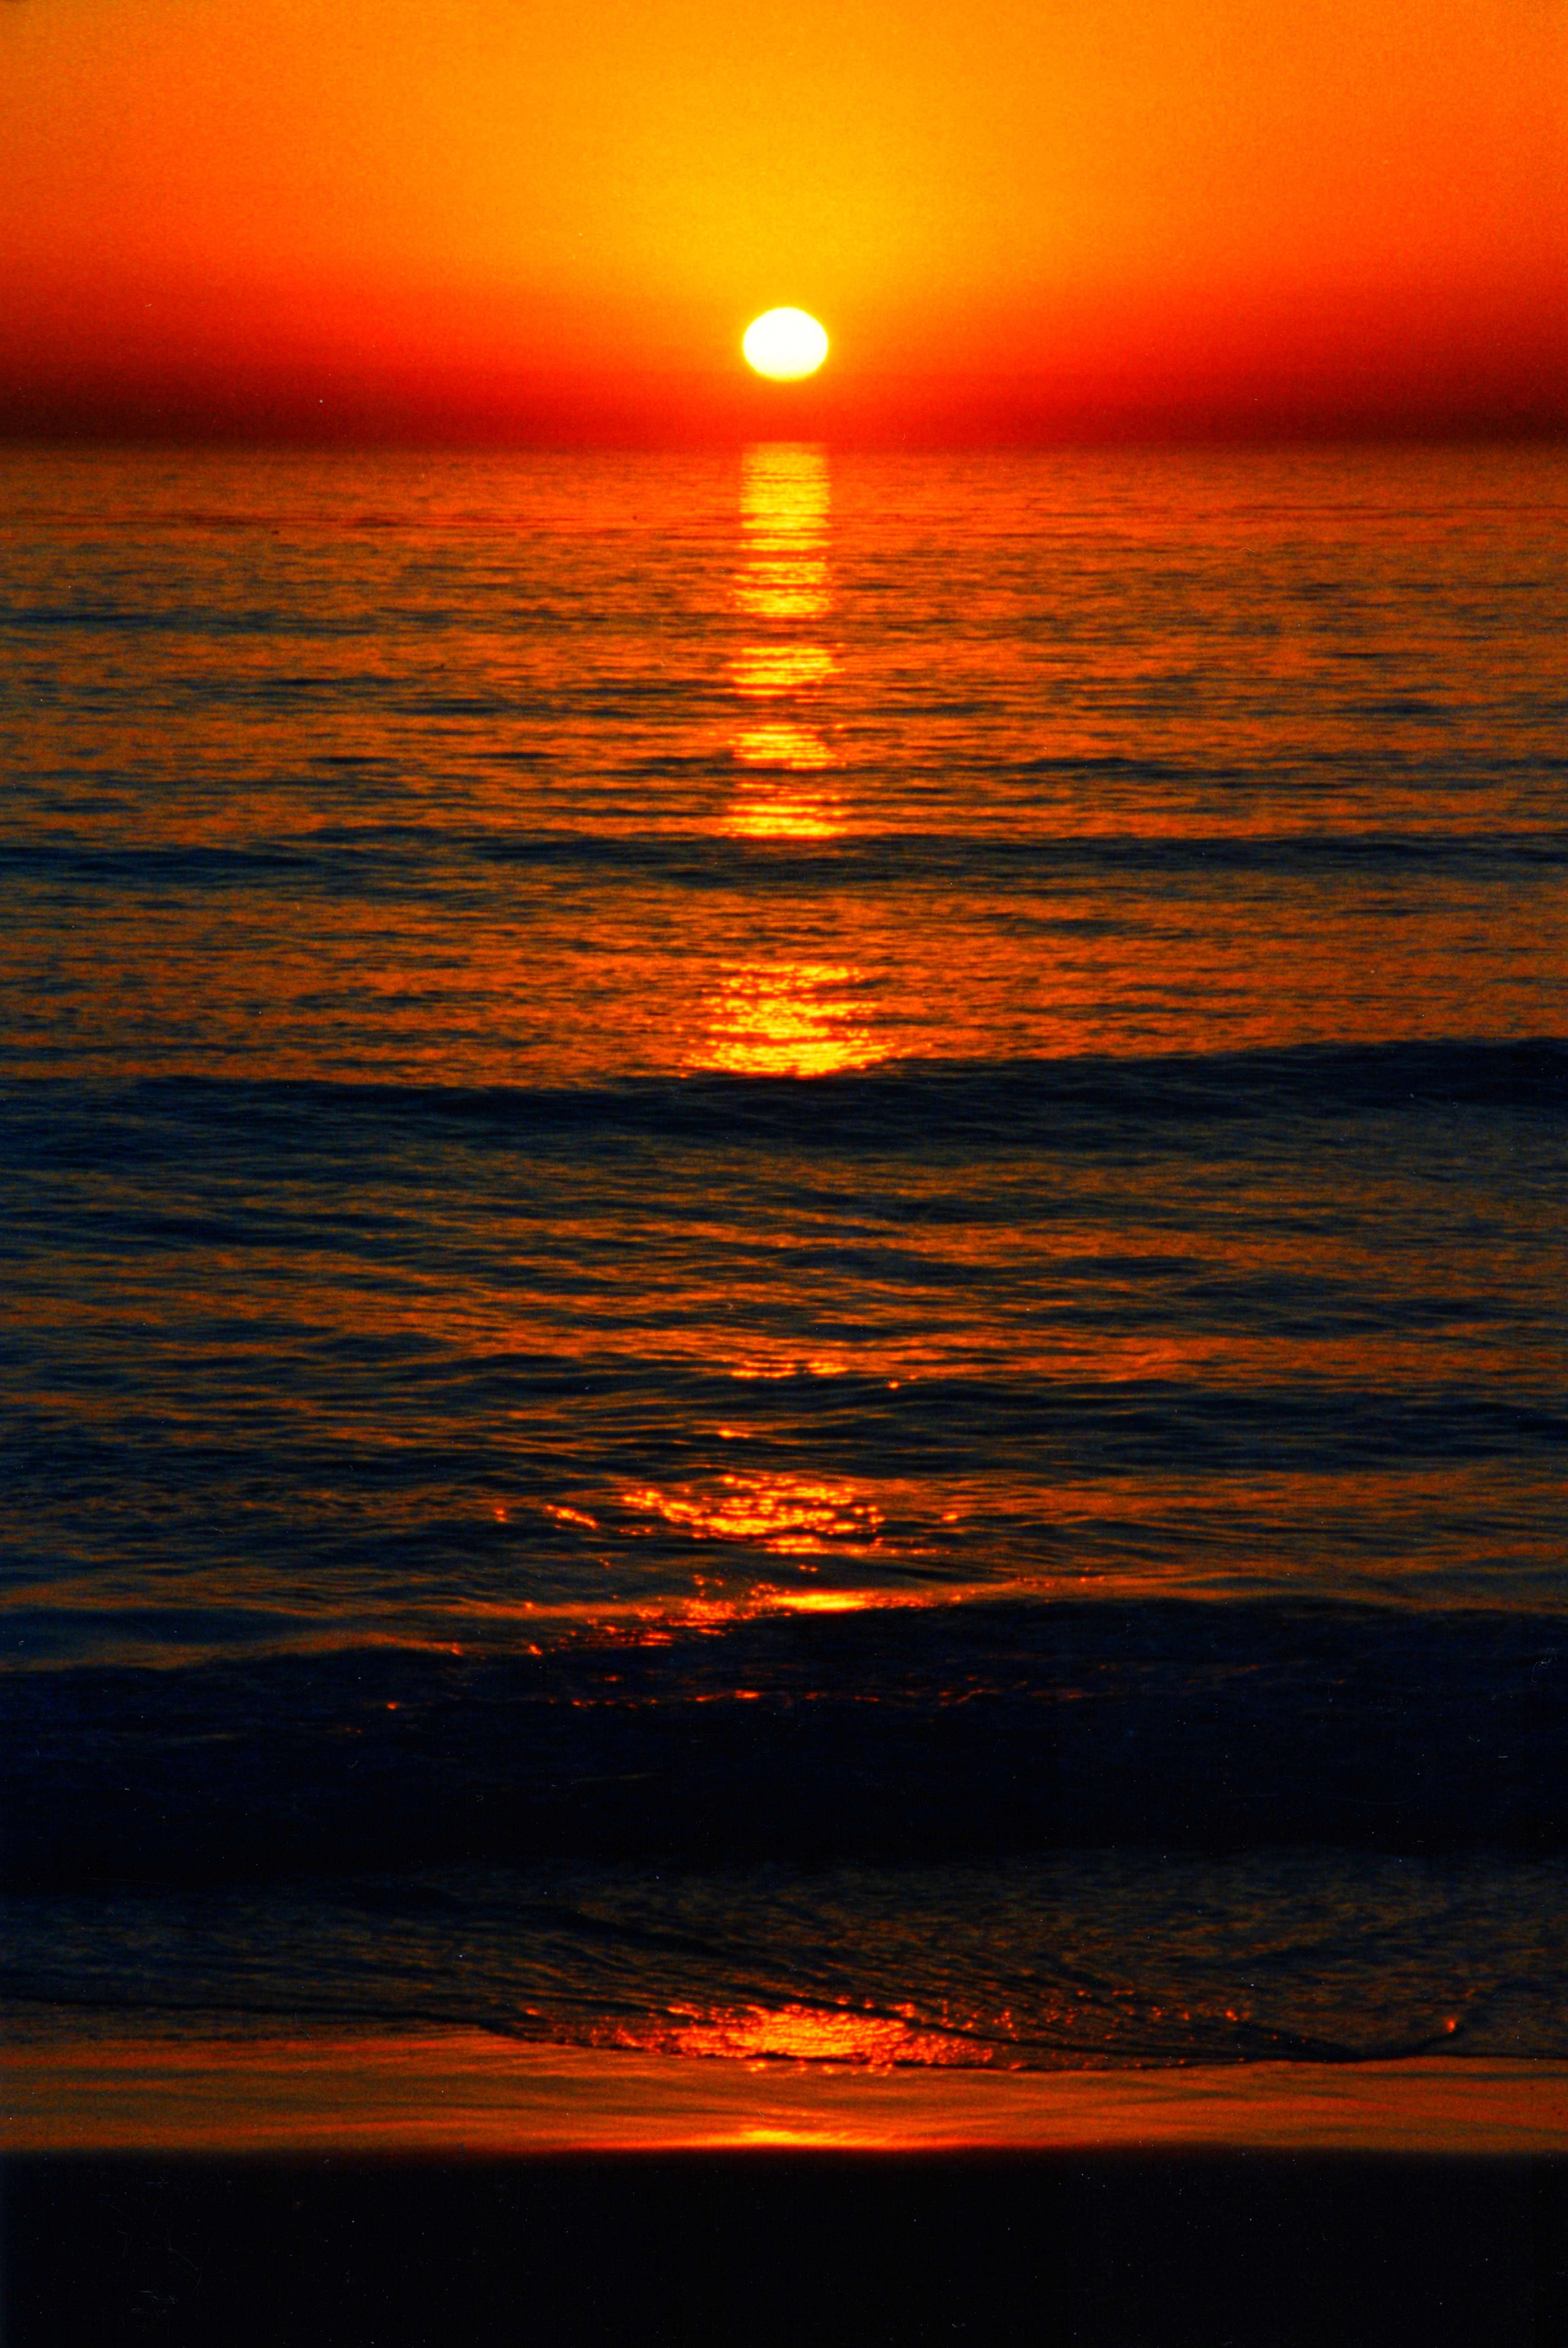 Sunset Over The Ocean Seascape In San Diego California Image Free